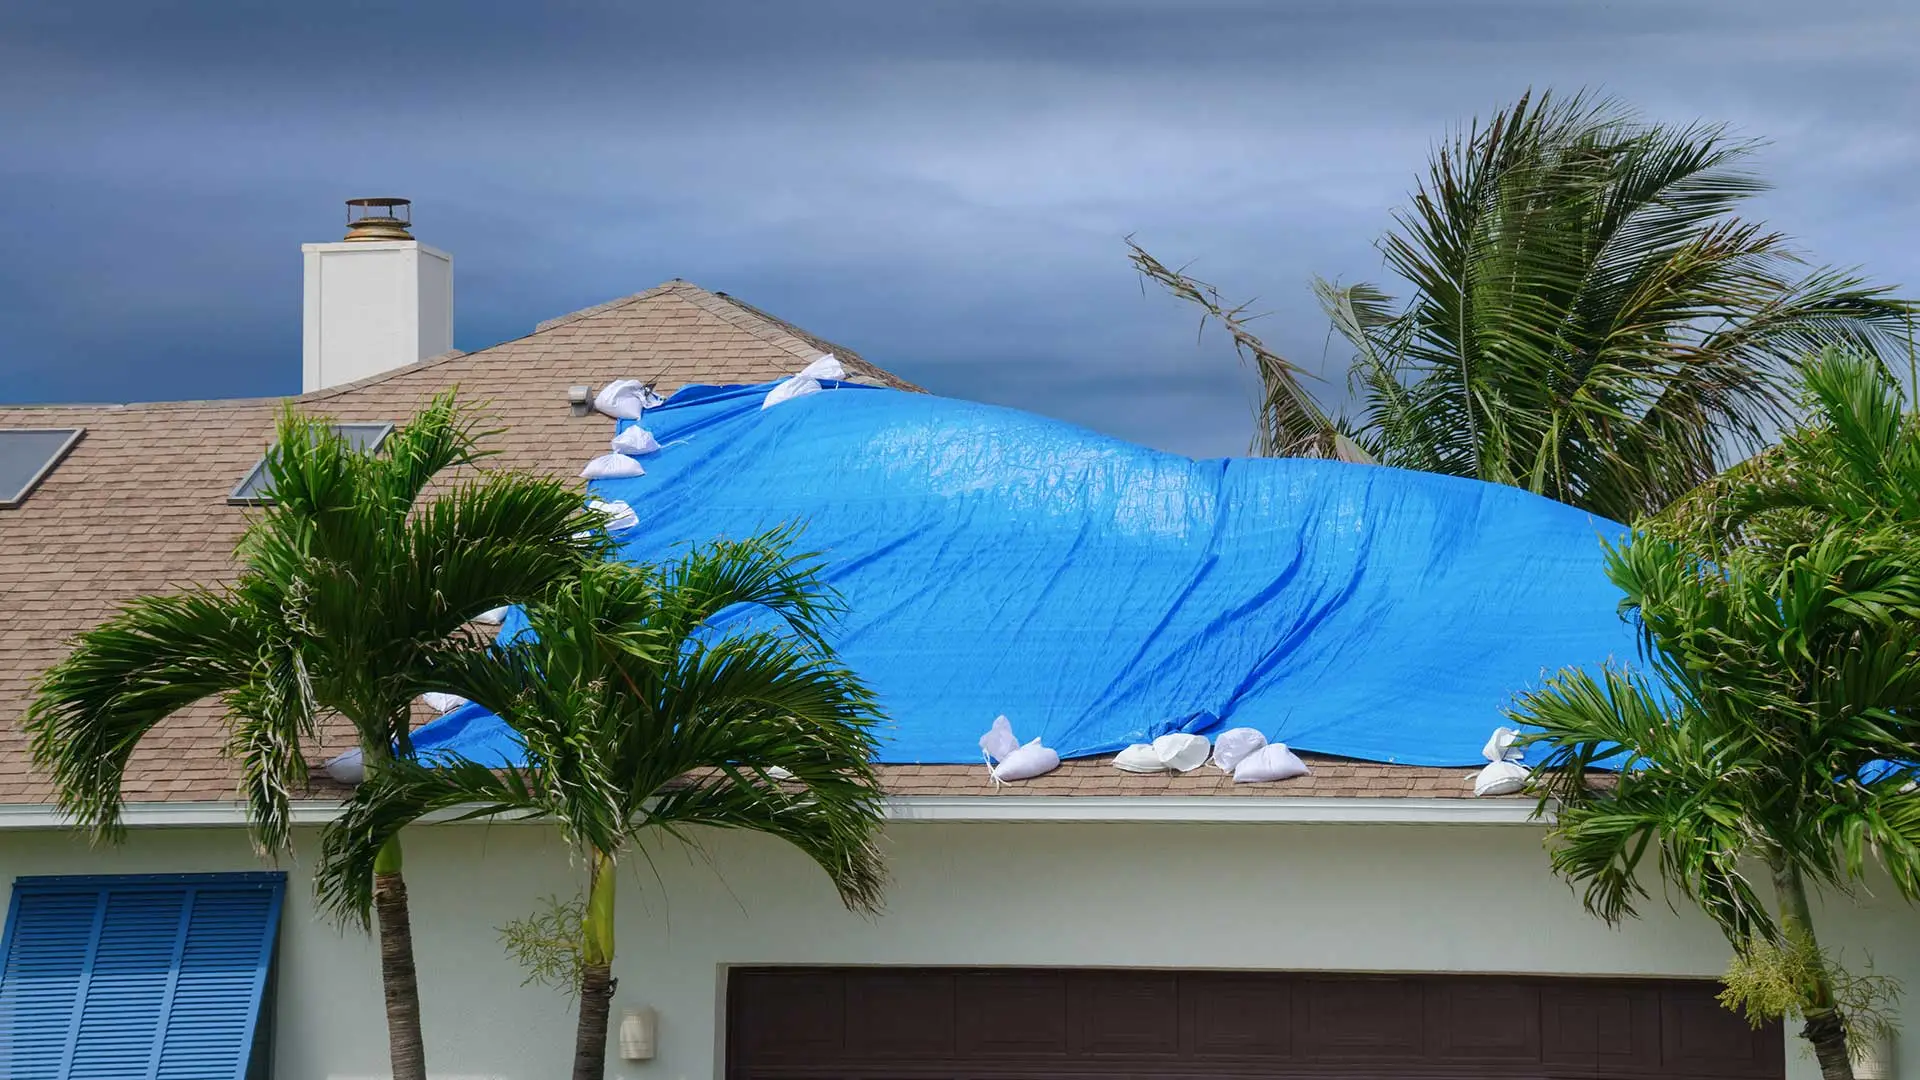 What Are the Common Causes of Roof Leaks in Central FL